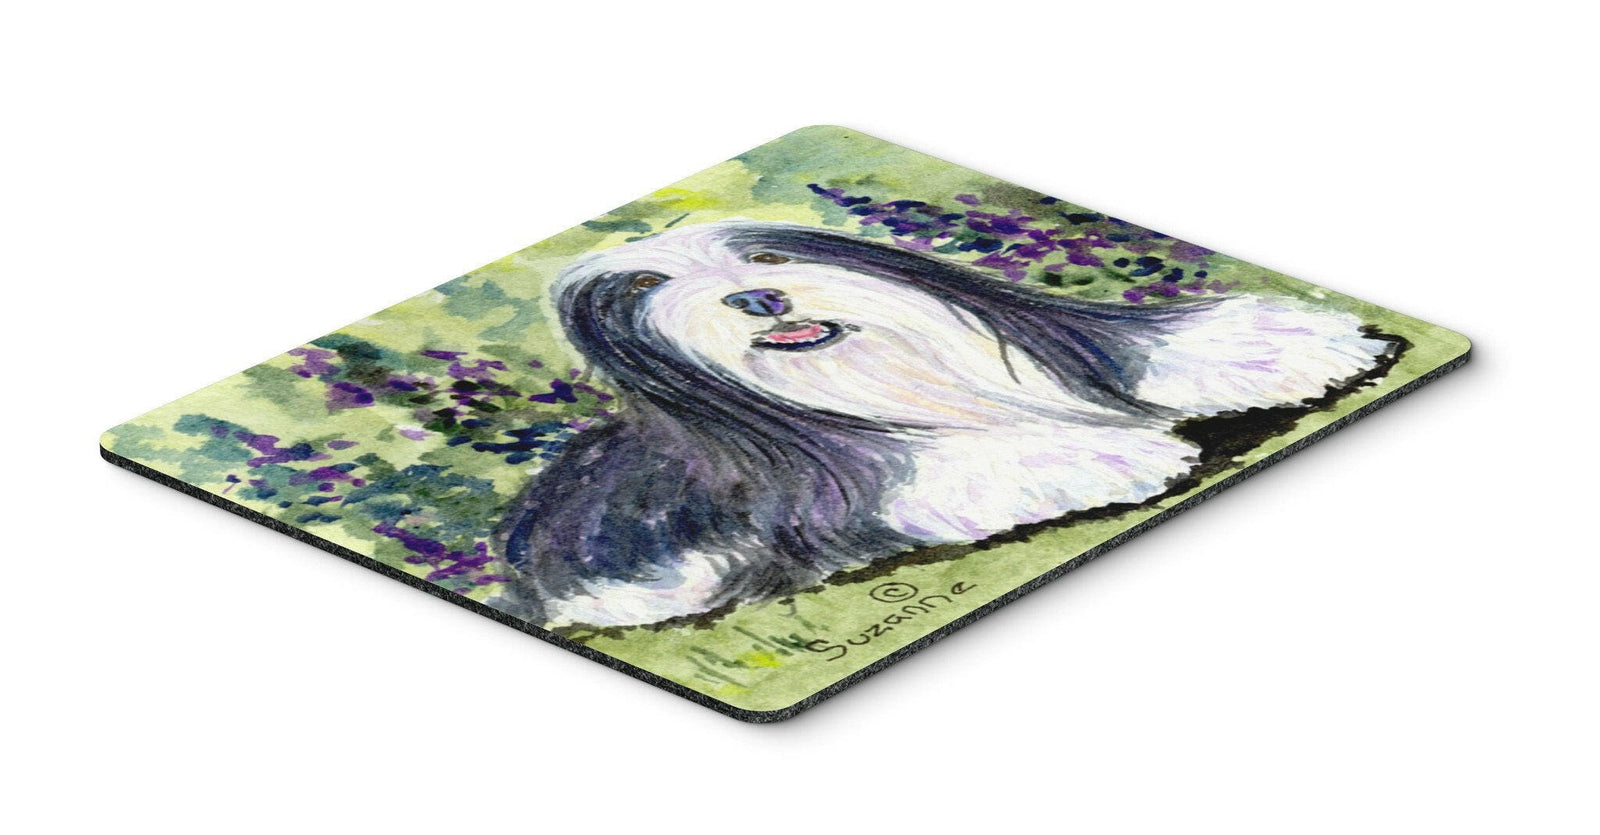 Bearded Collie Mouse pad, hot pad, or trivet by Caroline's Treasures